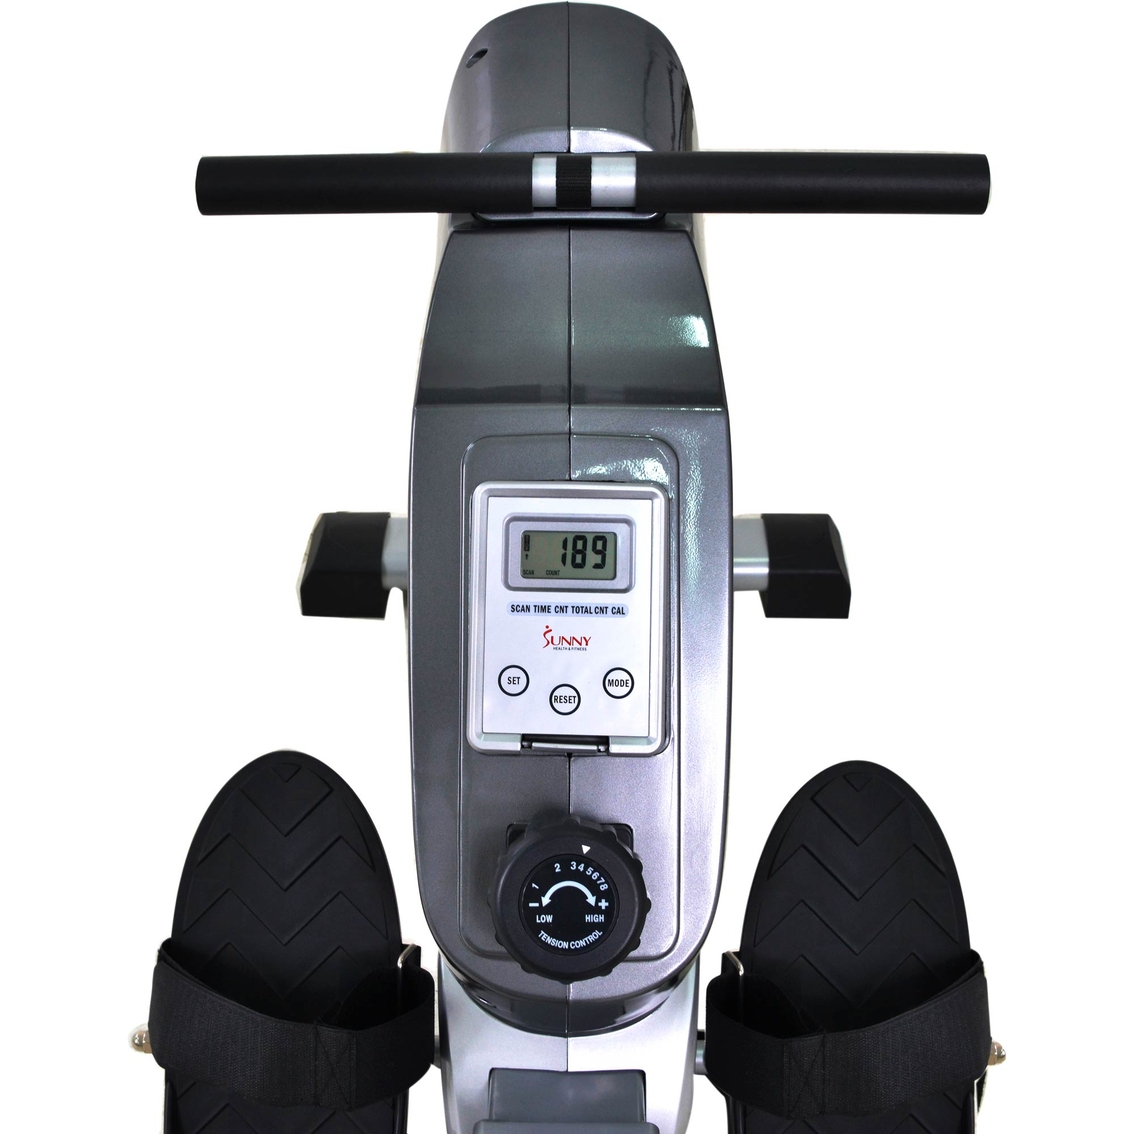 Sunny Health and Fitness Magnetic Rowing Machine - Image 3 of 4